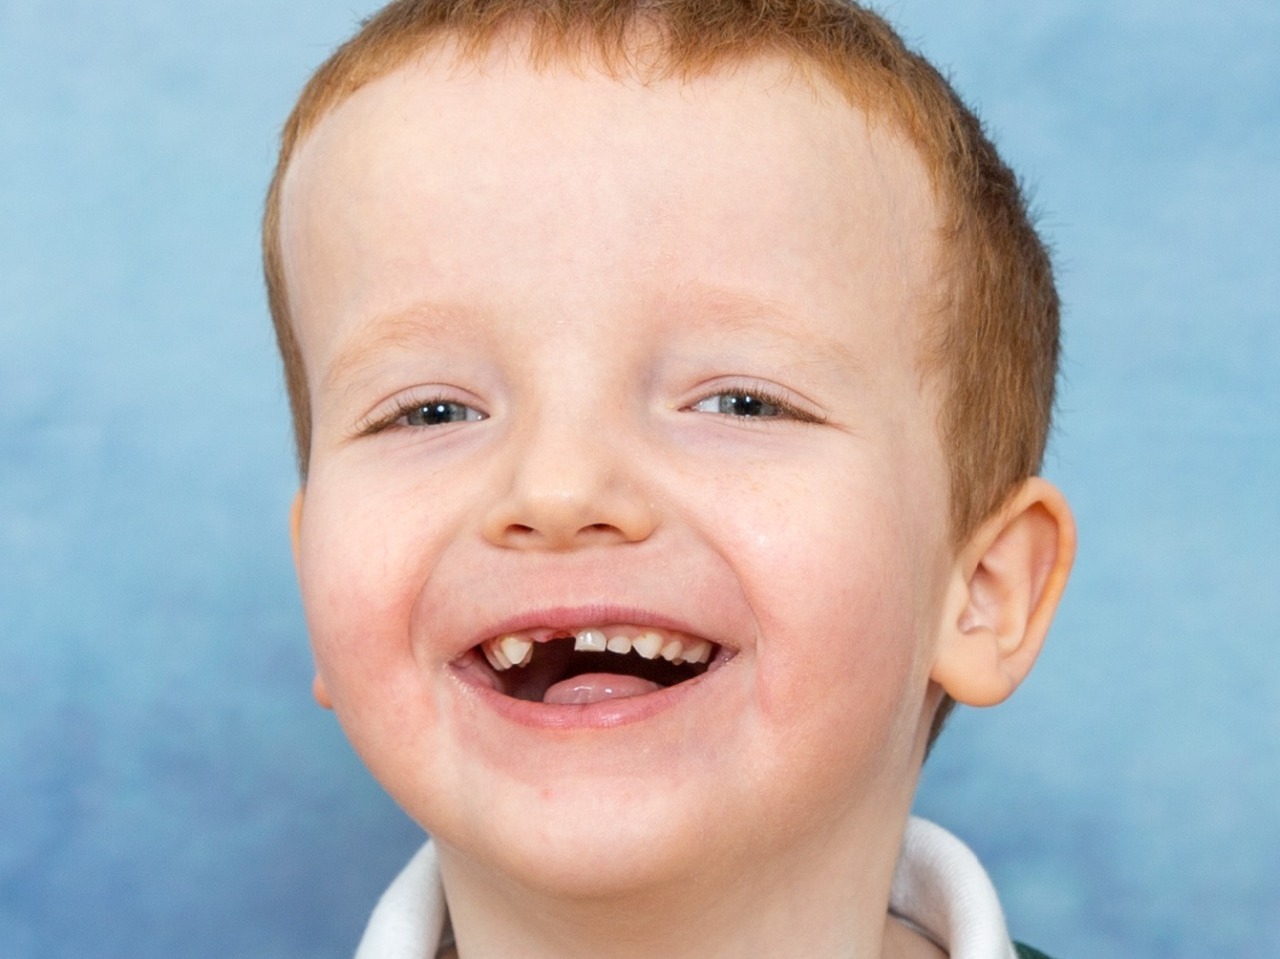 Happy smiles all around from this young lad at Tiverton School having his formal school photos